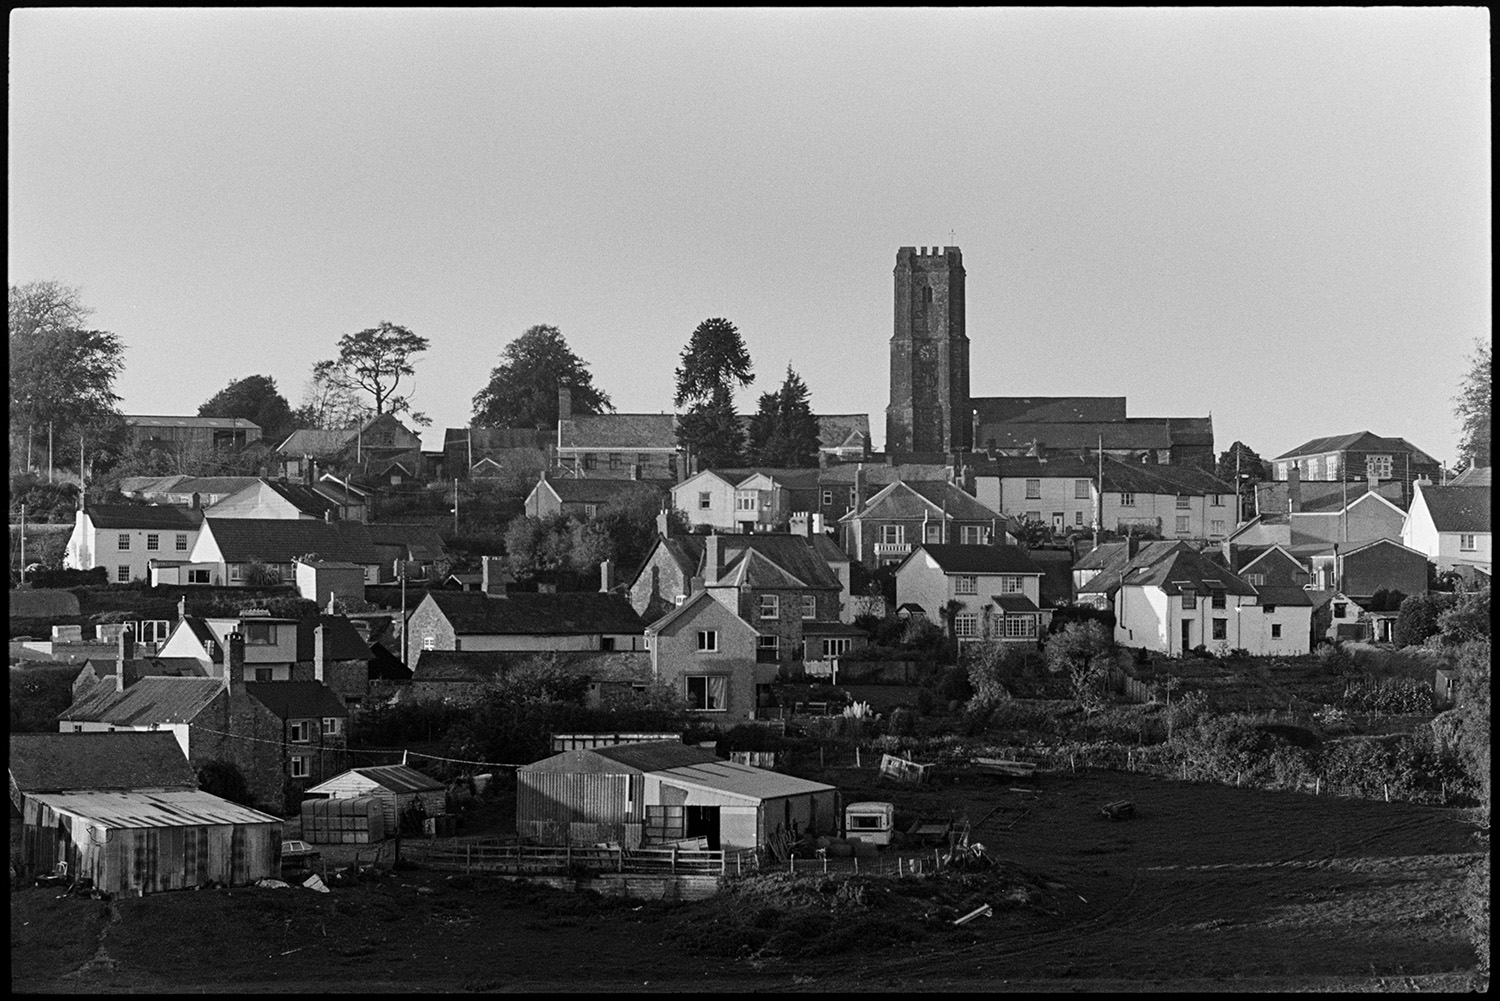 View of village with church and tower. 
[A view of Chittlehampton showing houses, farm buildings and the church tower in the background.]